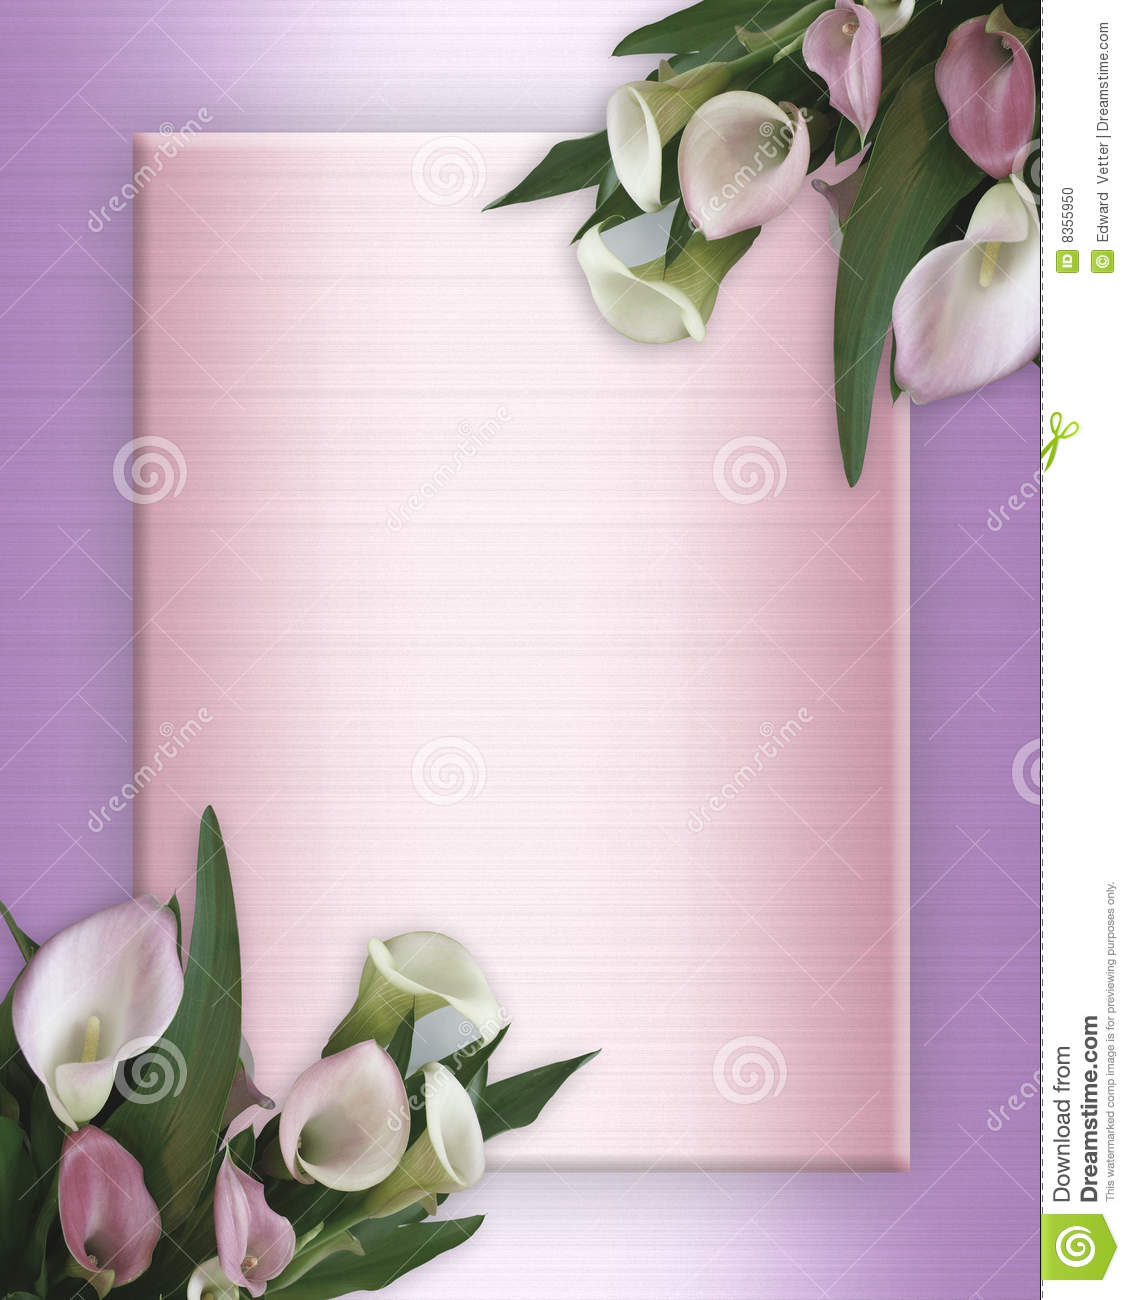 Related To Lily Stock Illustrations Clip Art Image And